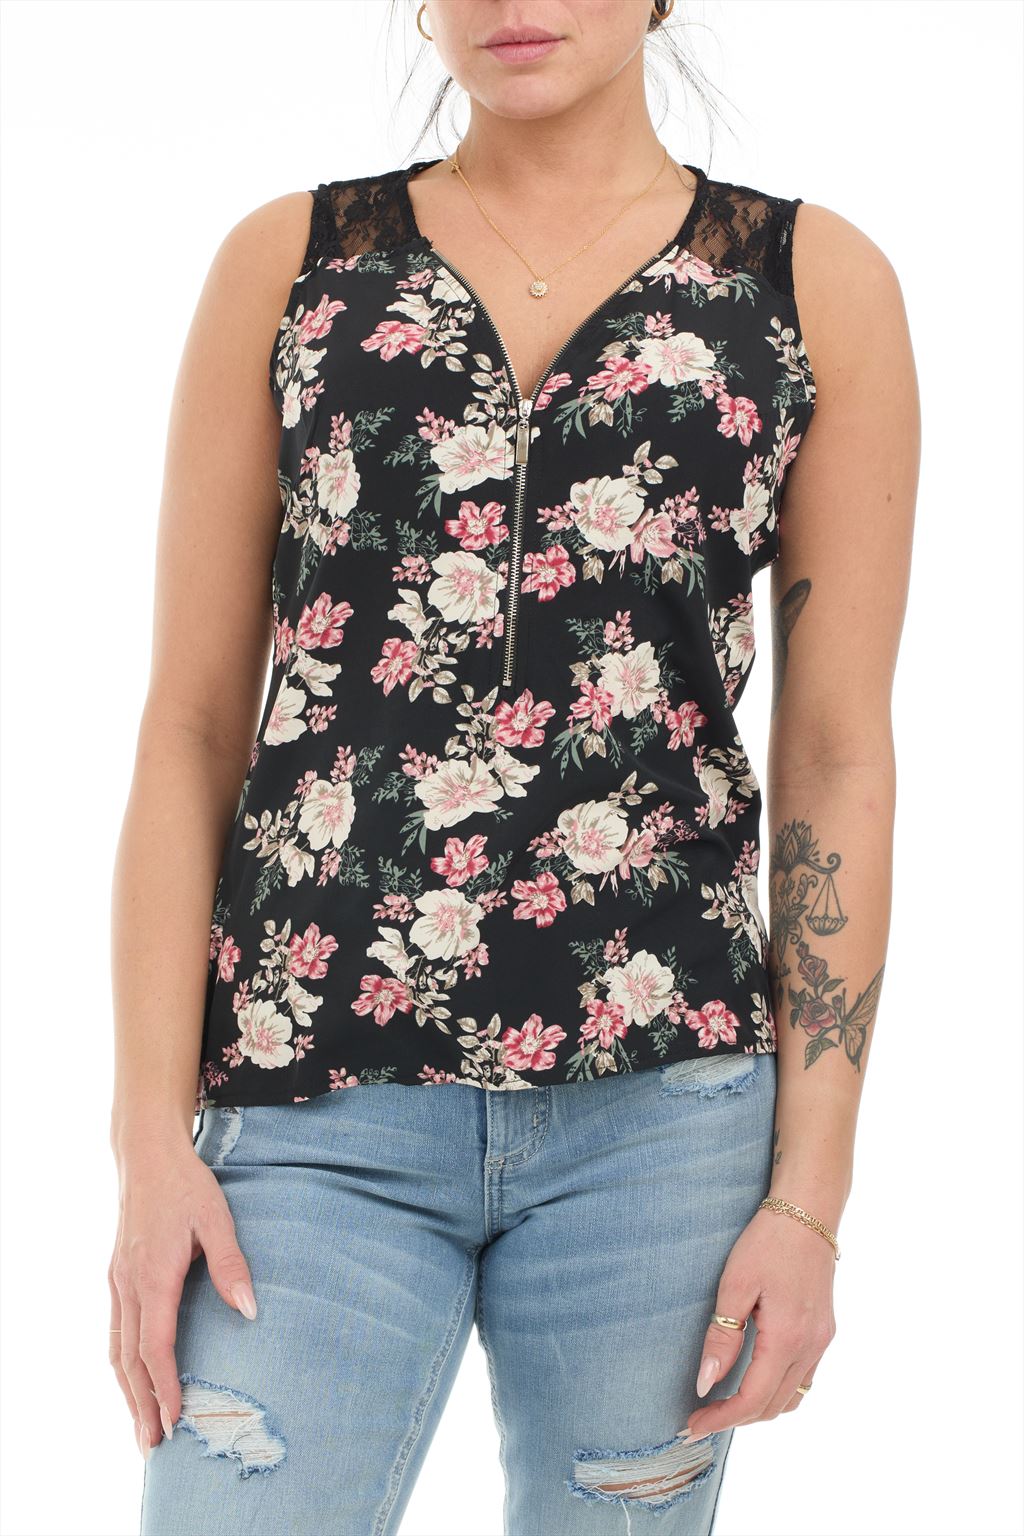 Floral blouse with zipper